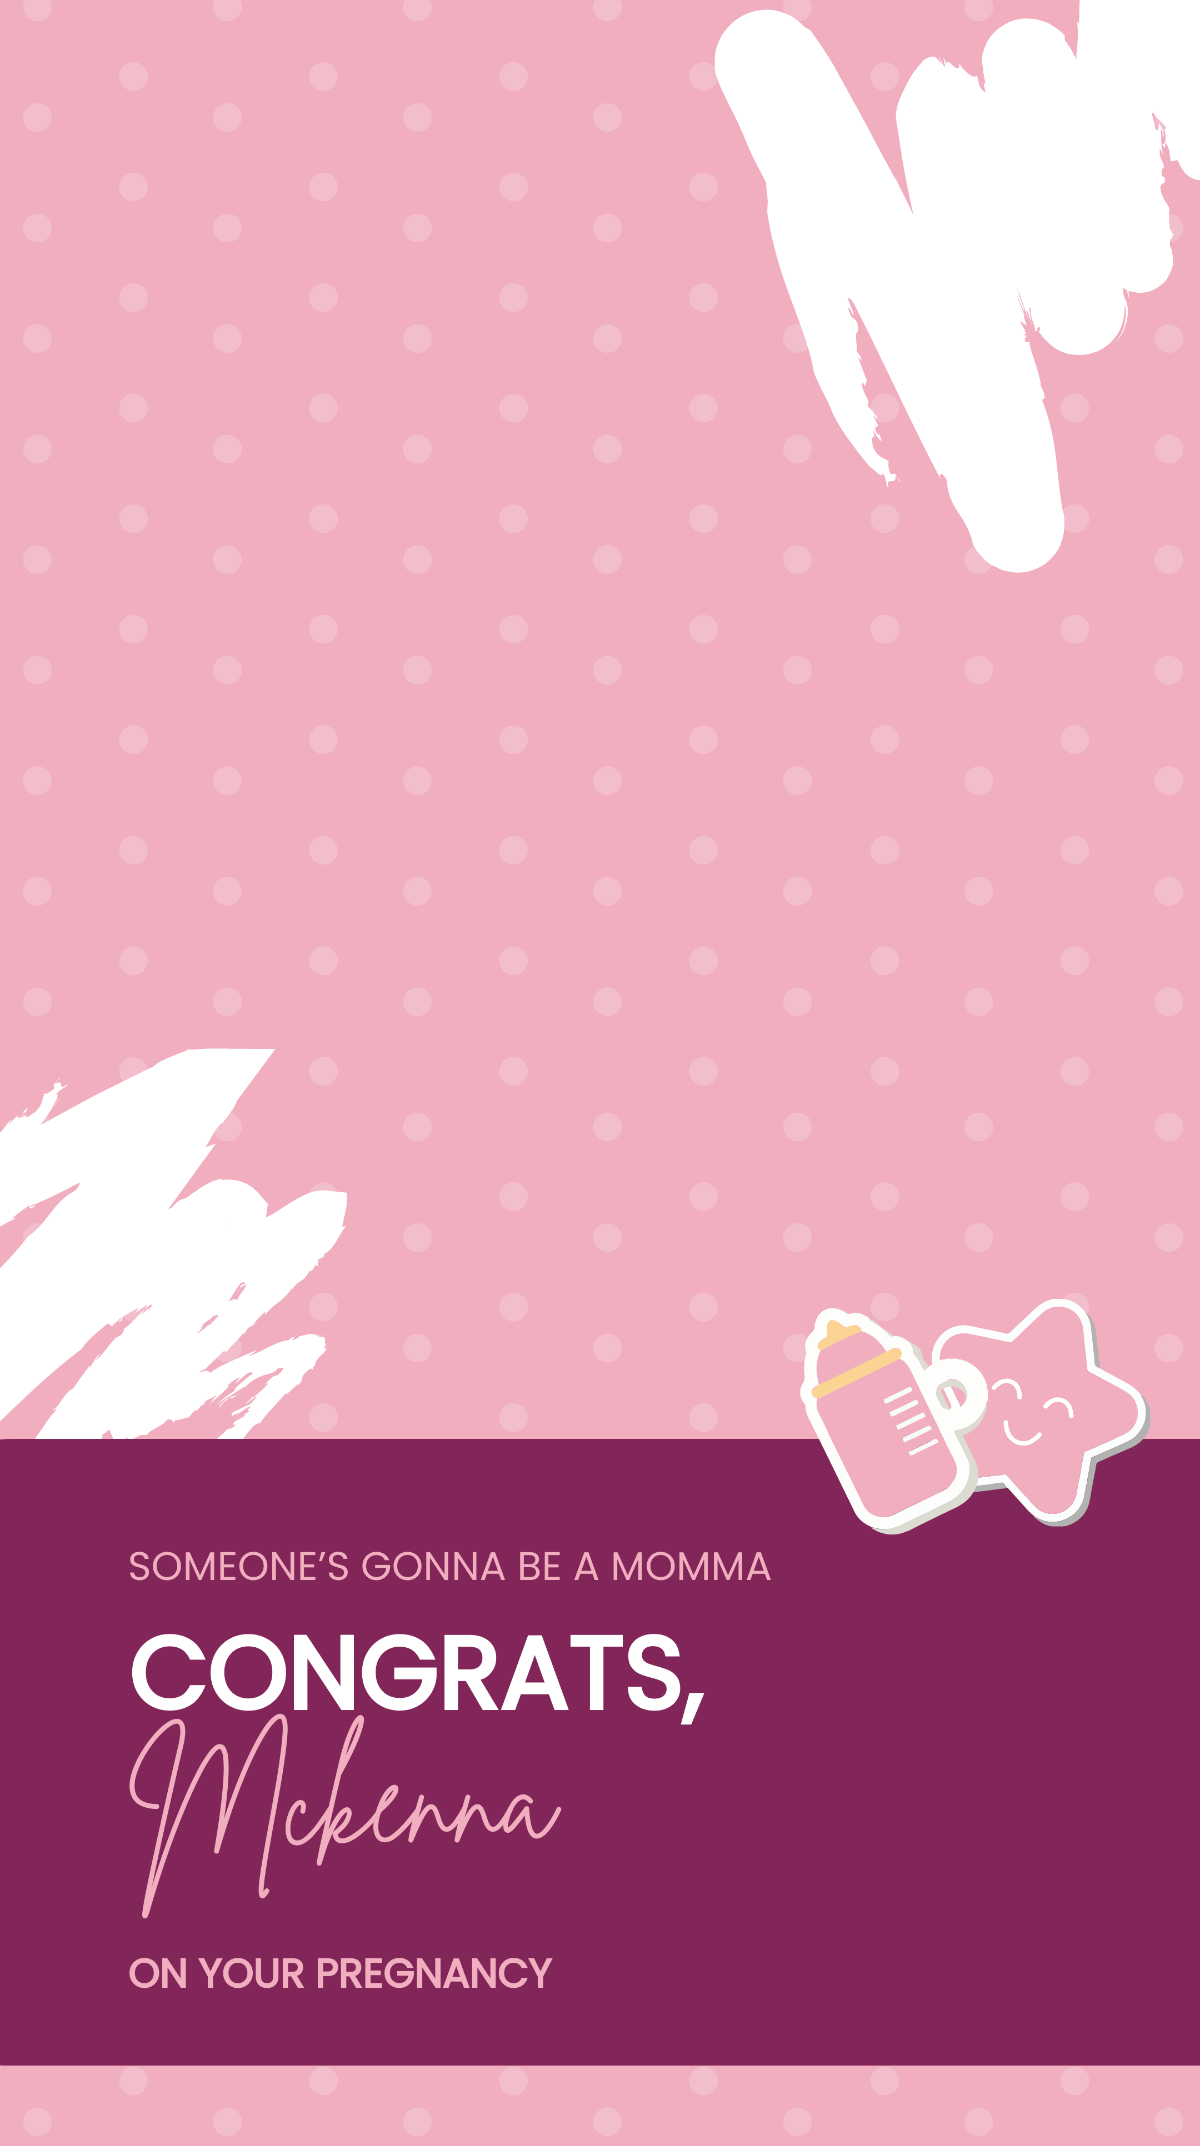 Pregnancy Announcement Snapchat Geofilter Template